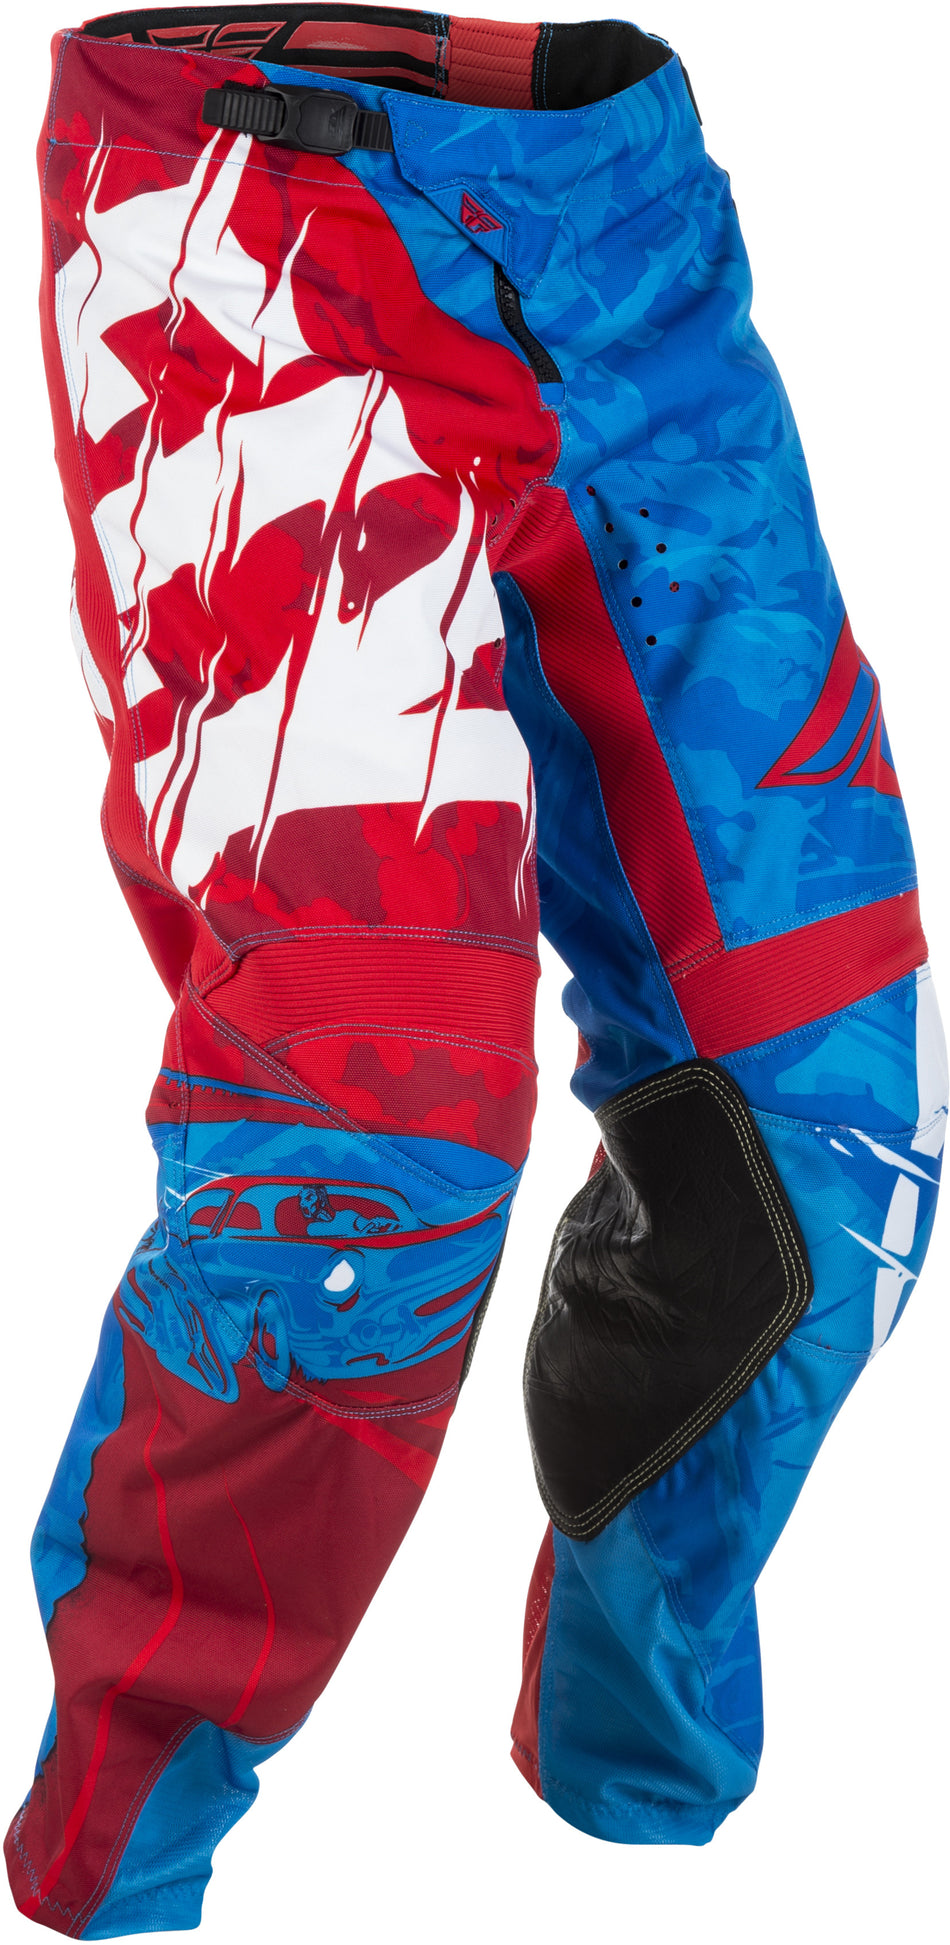 FLY RACING Kinetic Outlaw Pants Red/Blue Sz 34 371-53234